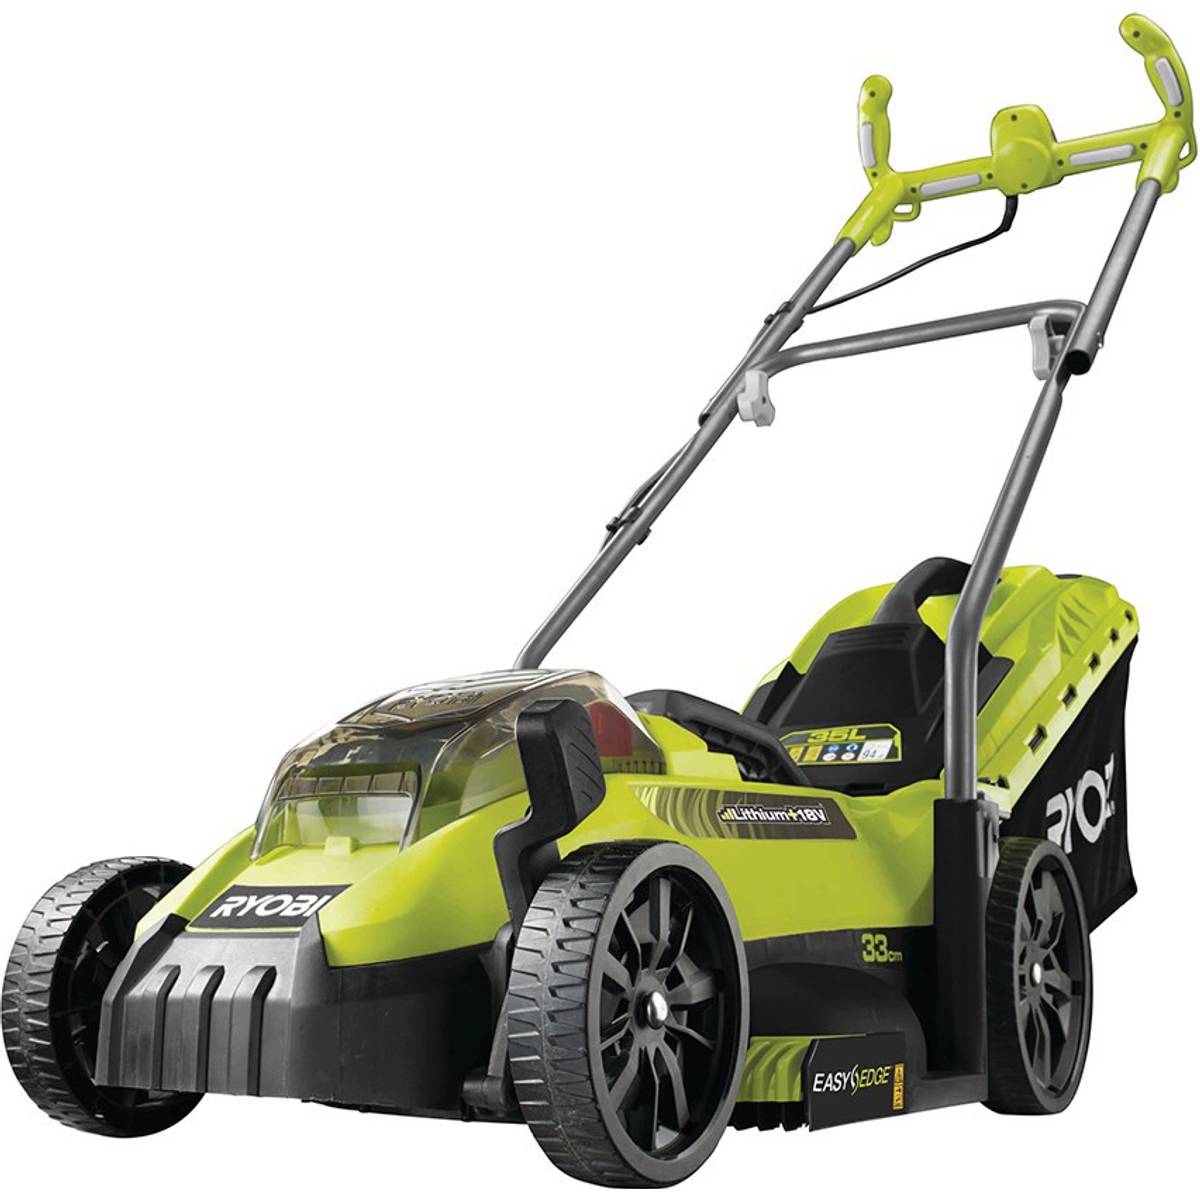 Ryobi Lawn Mowers (32 products) on PriceRunner • See lowest prices